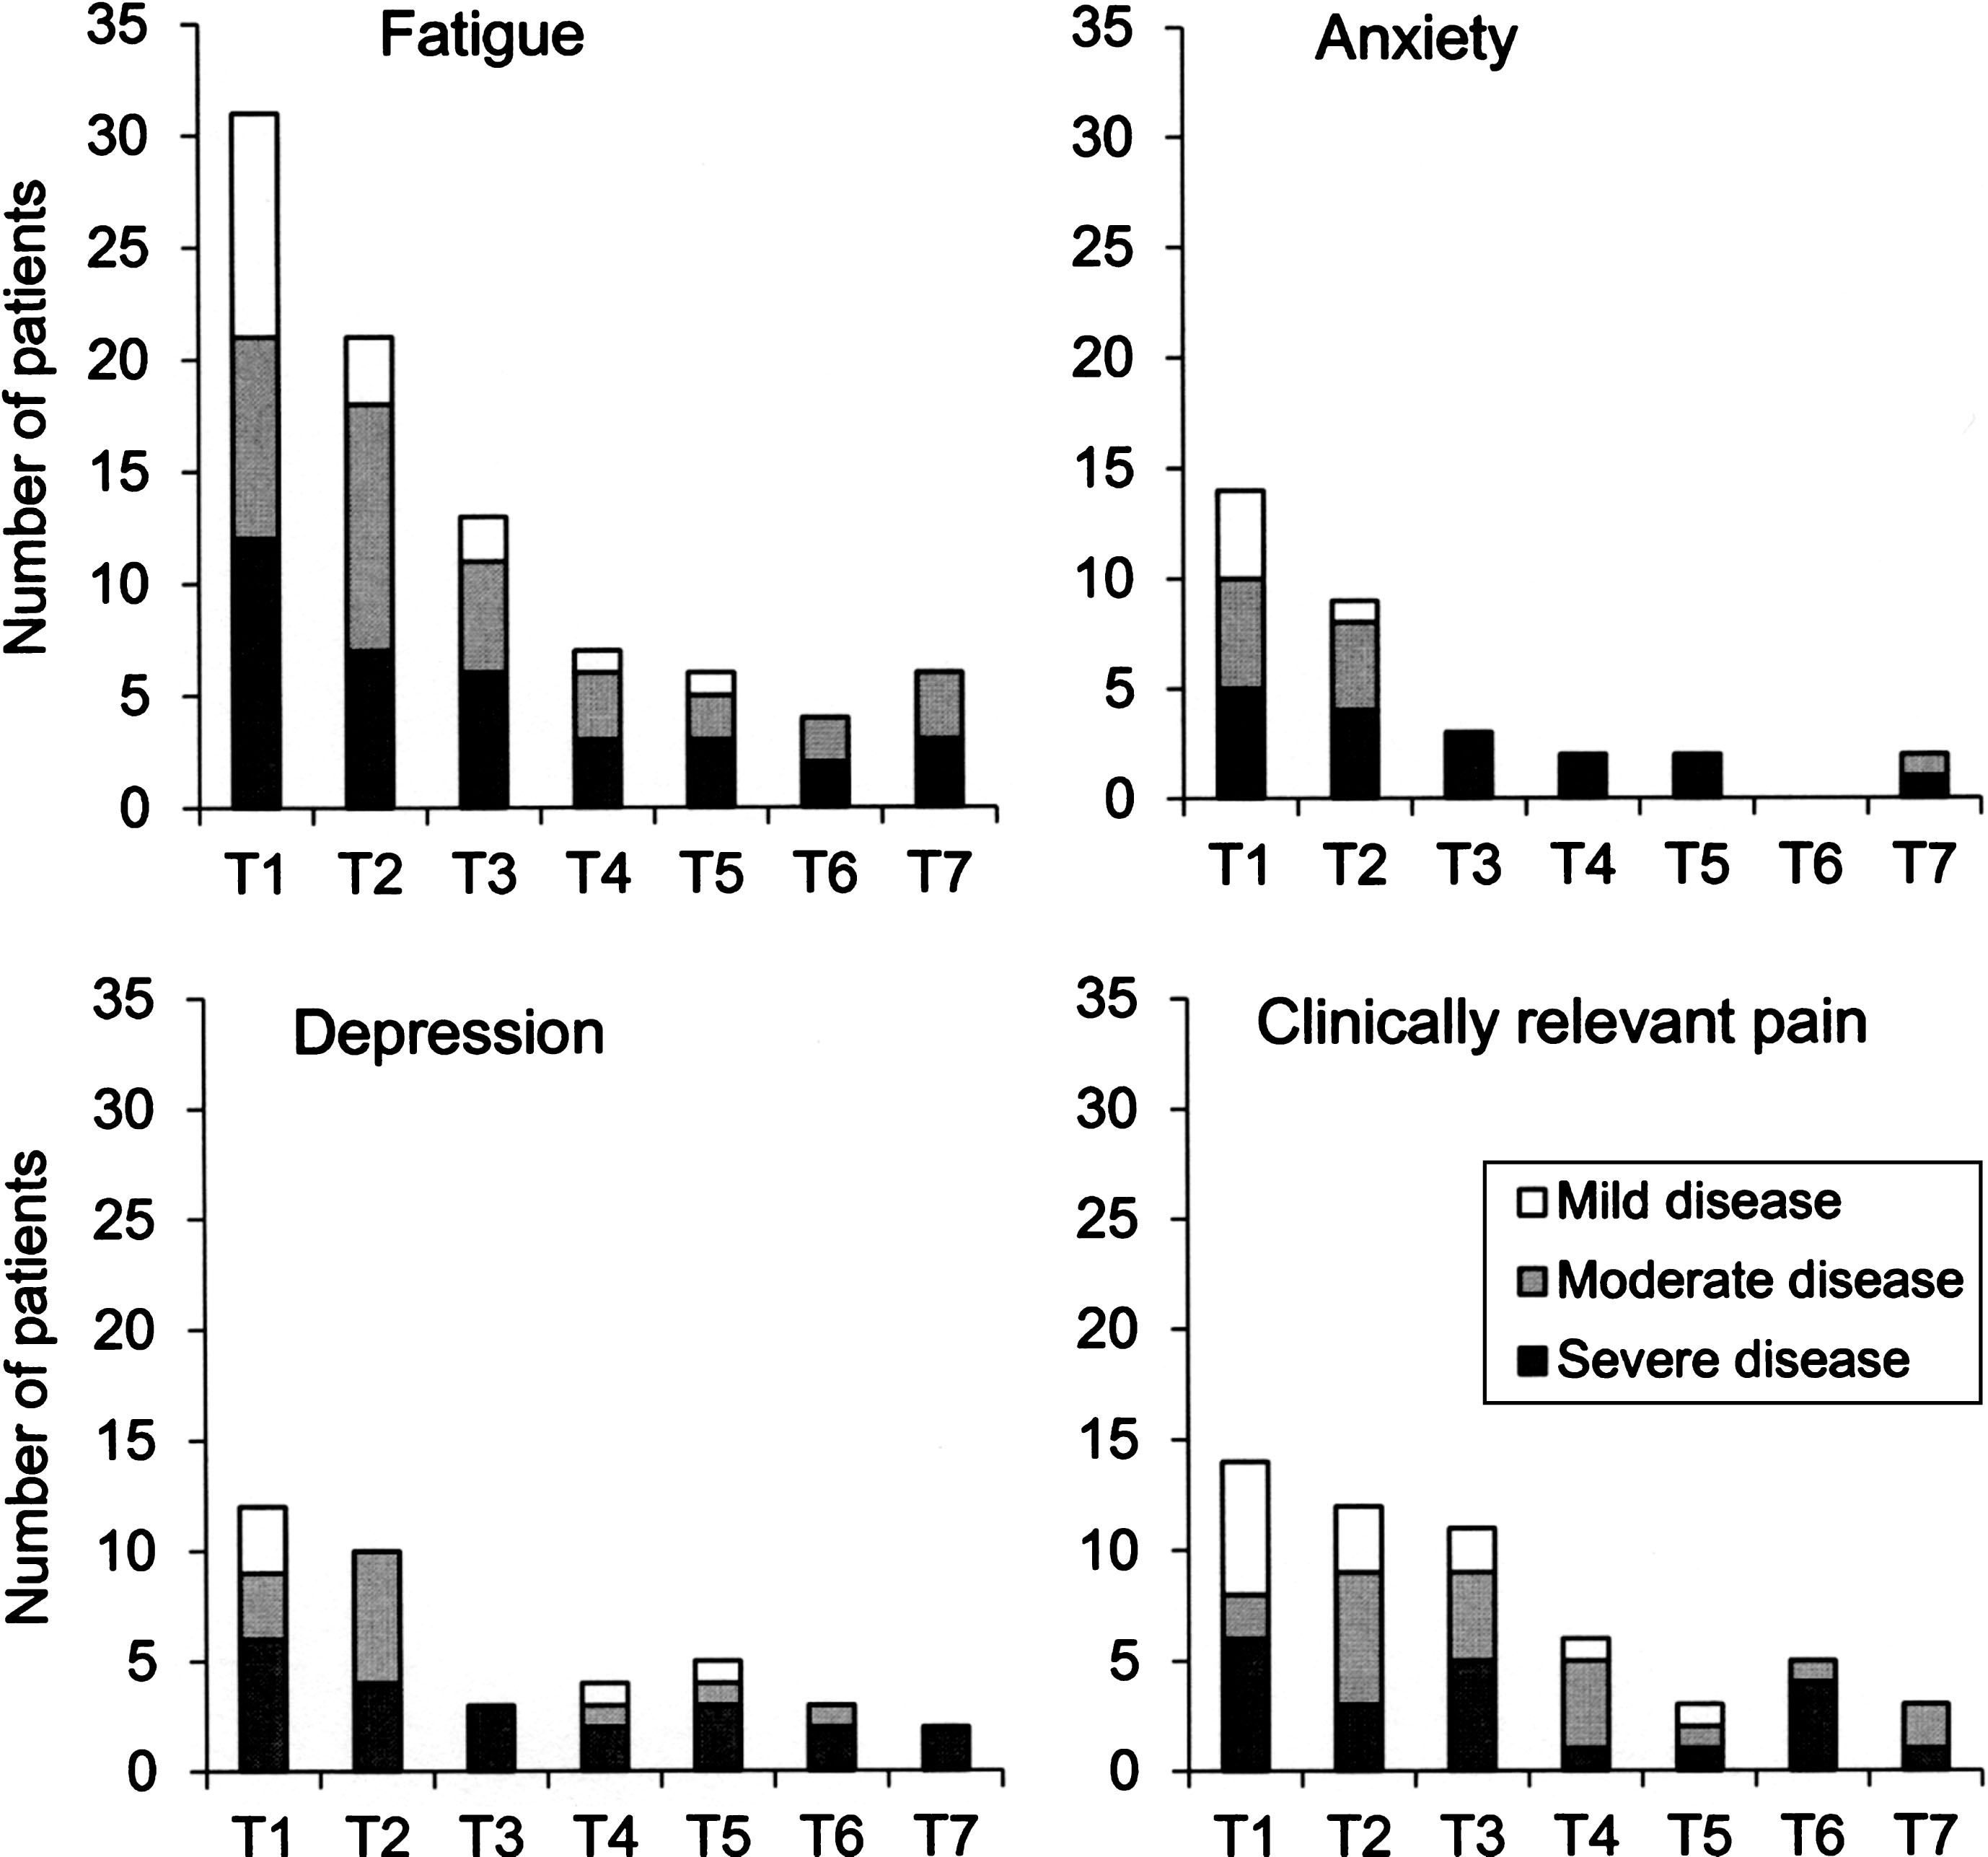 Presence of impairments (i.e. fatigue, anxiety, depression and clinically relevant pain) in relation to the three levels of disease severity (mild, moderate and severe) at baseline (T1) and each six-month follow-up (T2-T7). The y-axis shows the number of patients categorized as having an impairment.